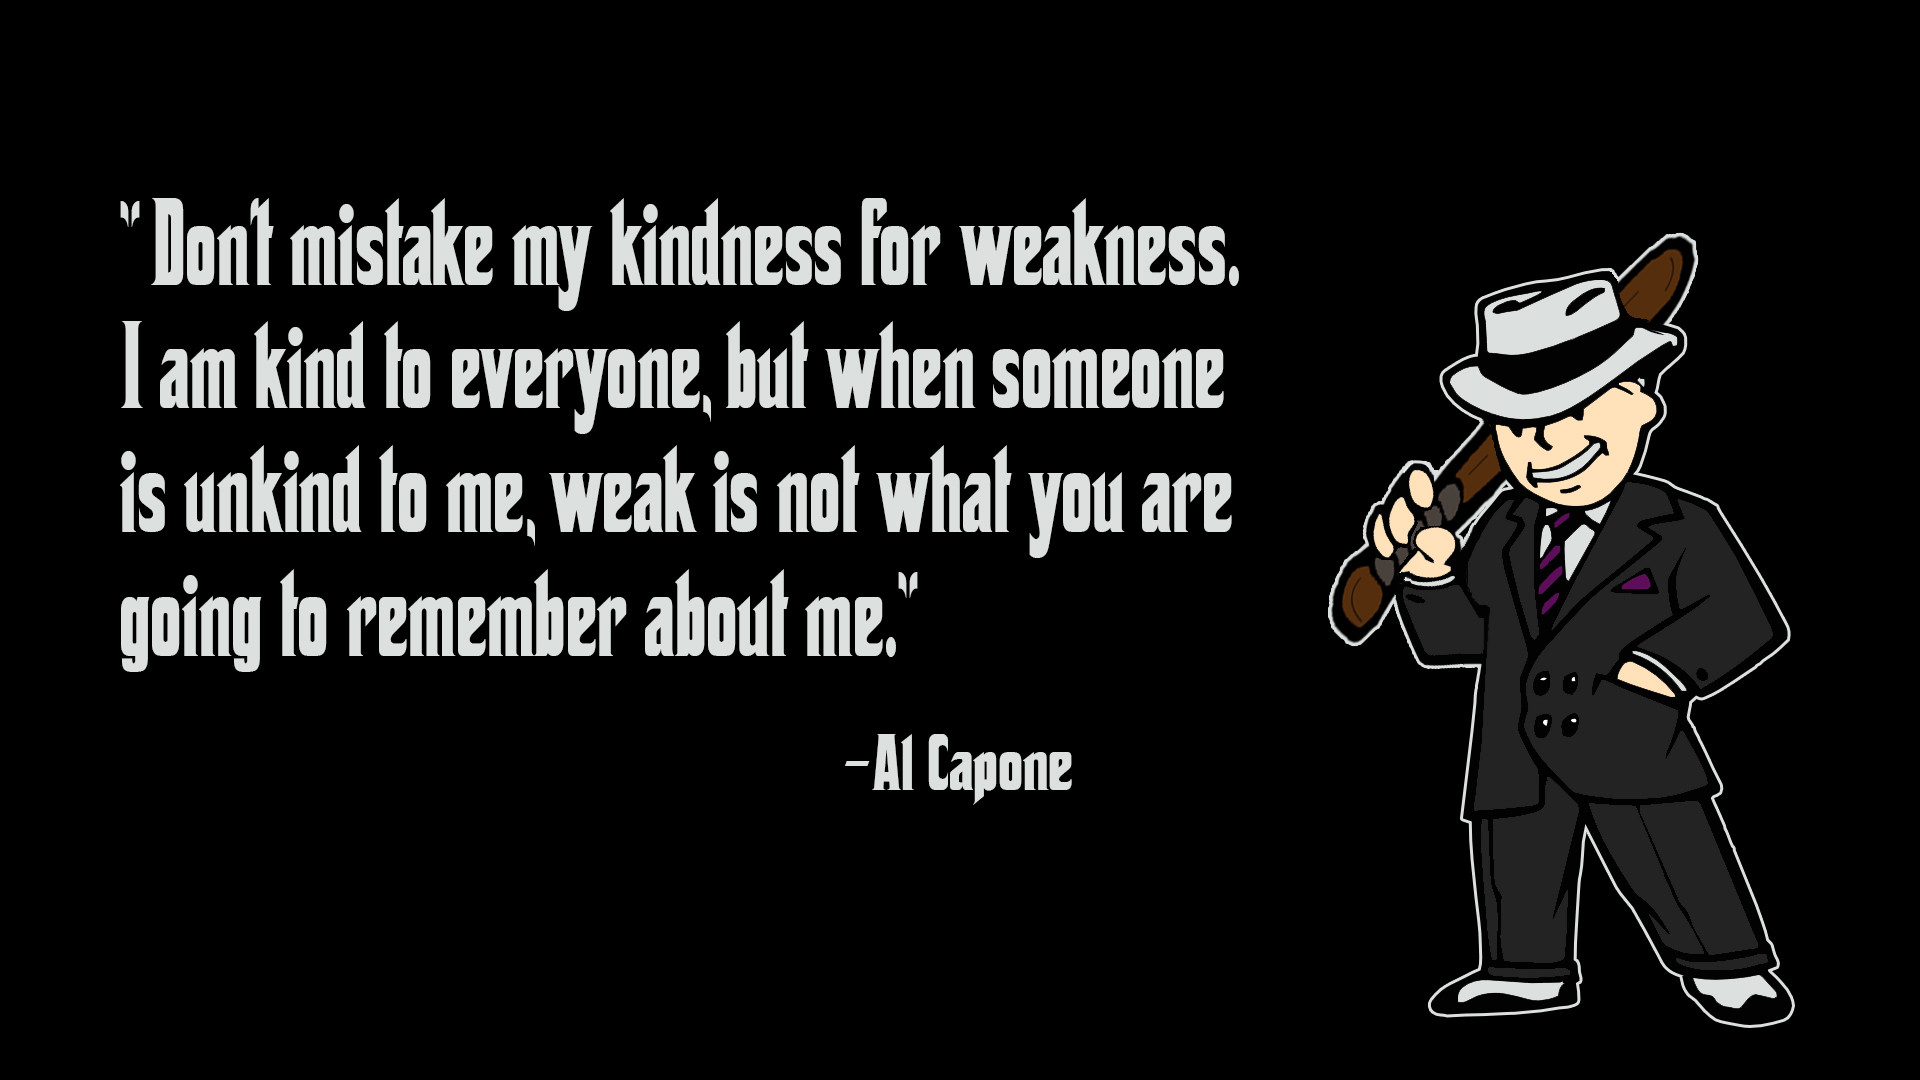 Al Capone Quotes Kindness
 Fallout Kindness Al Capone by ImTabe on DeviantArt